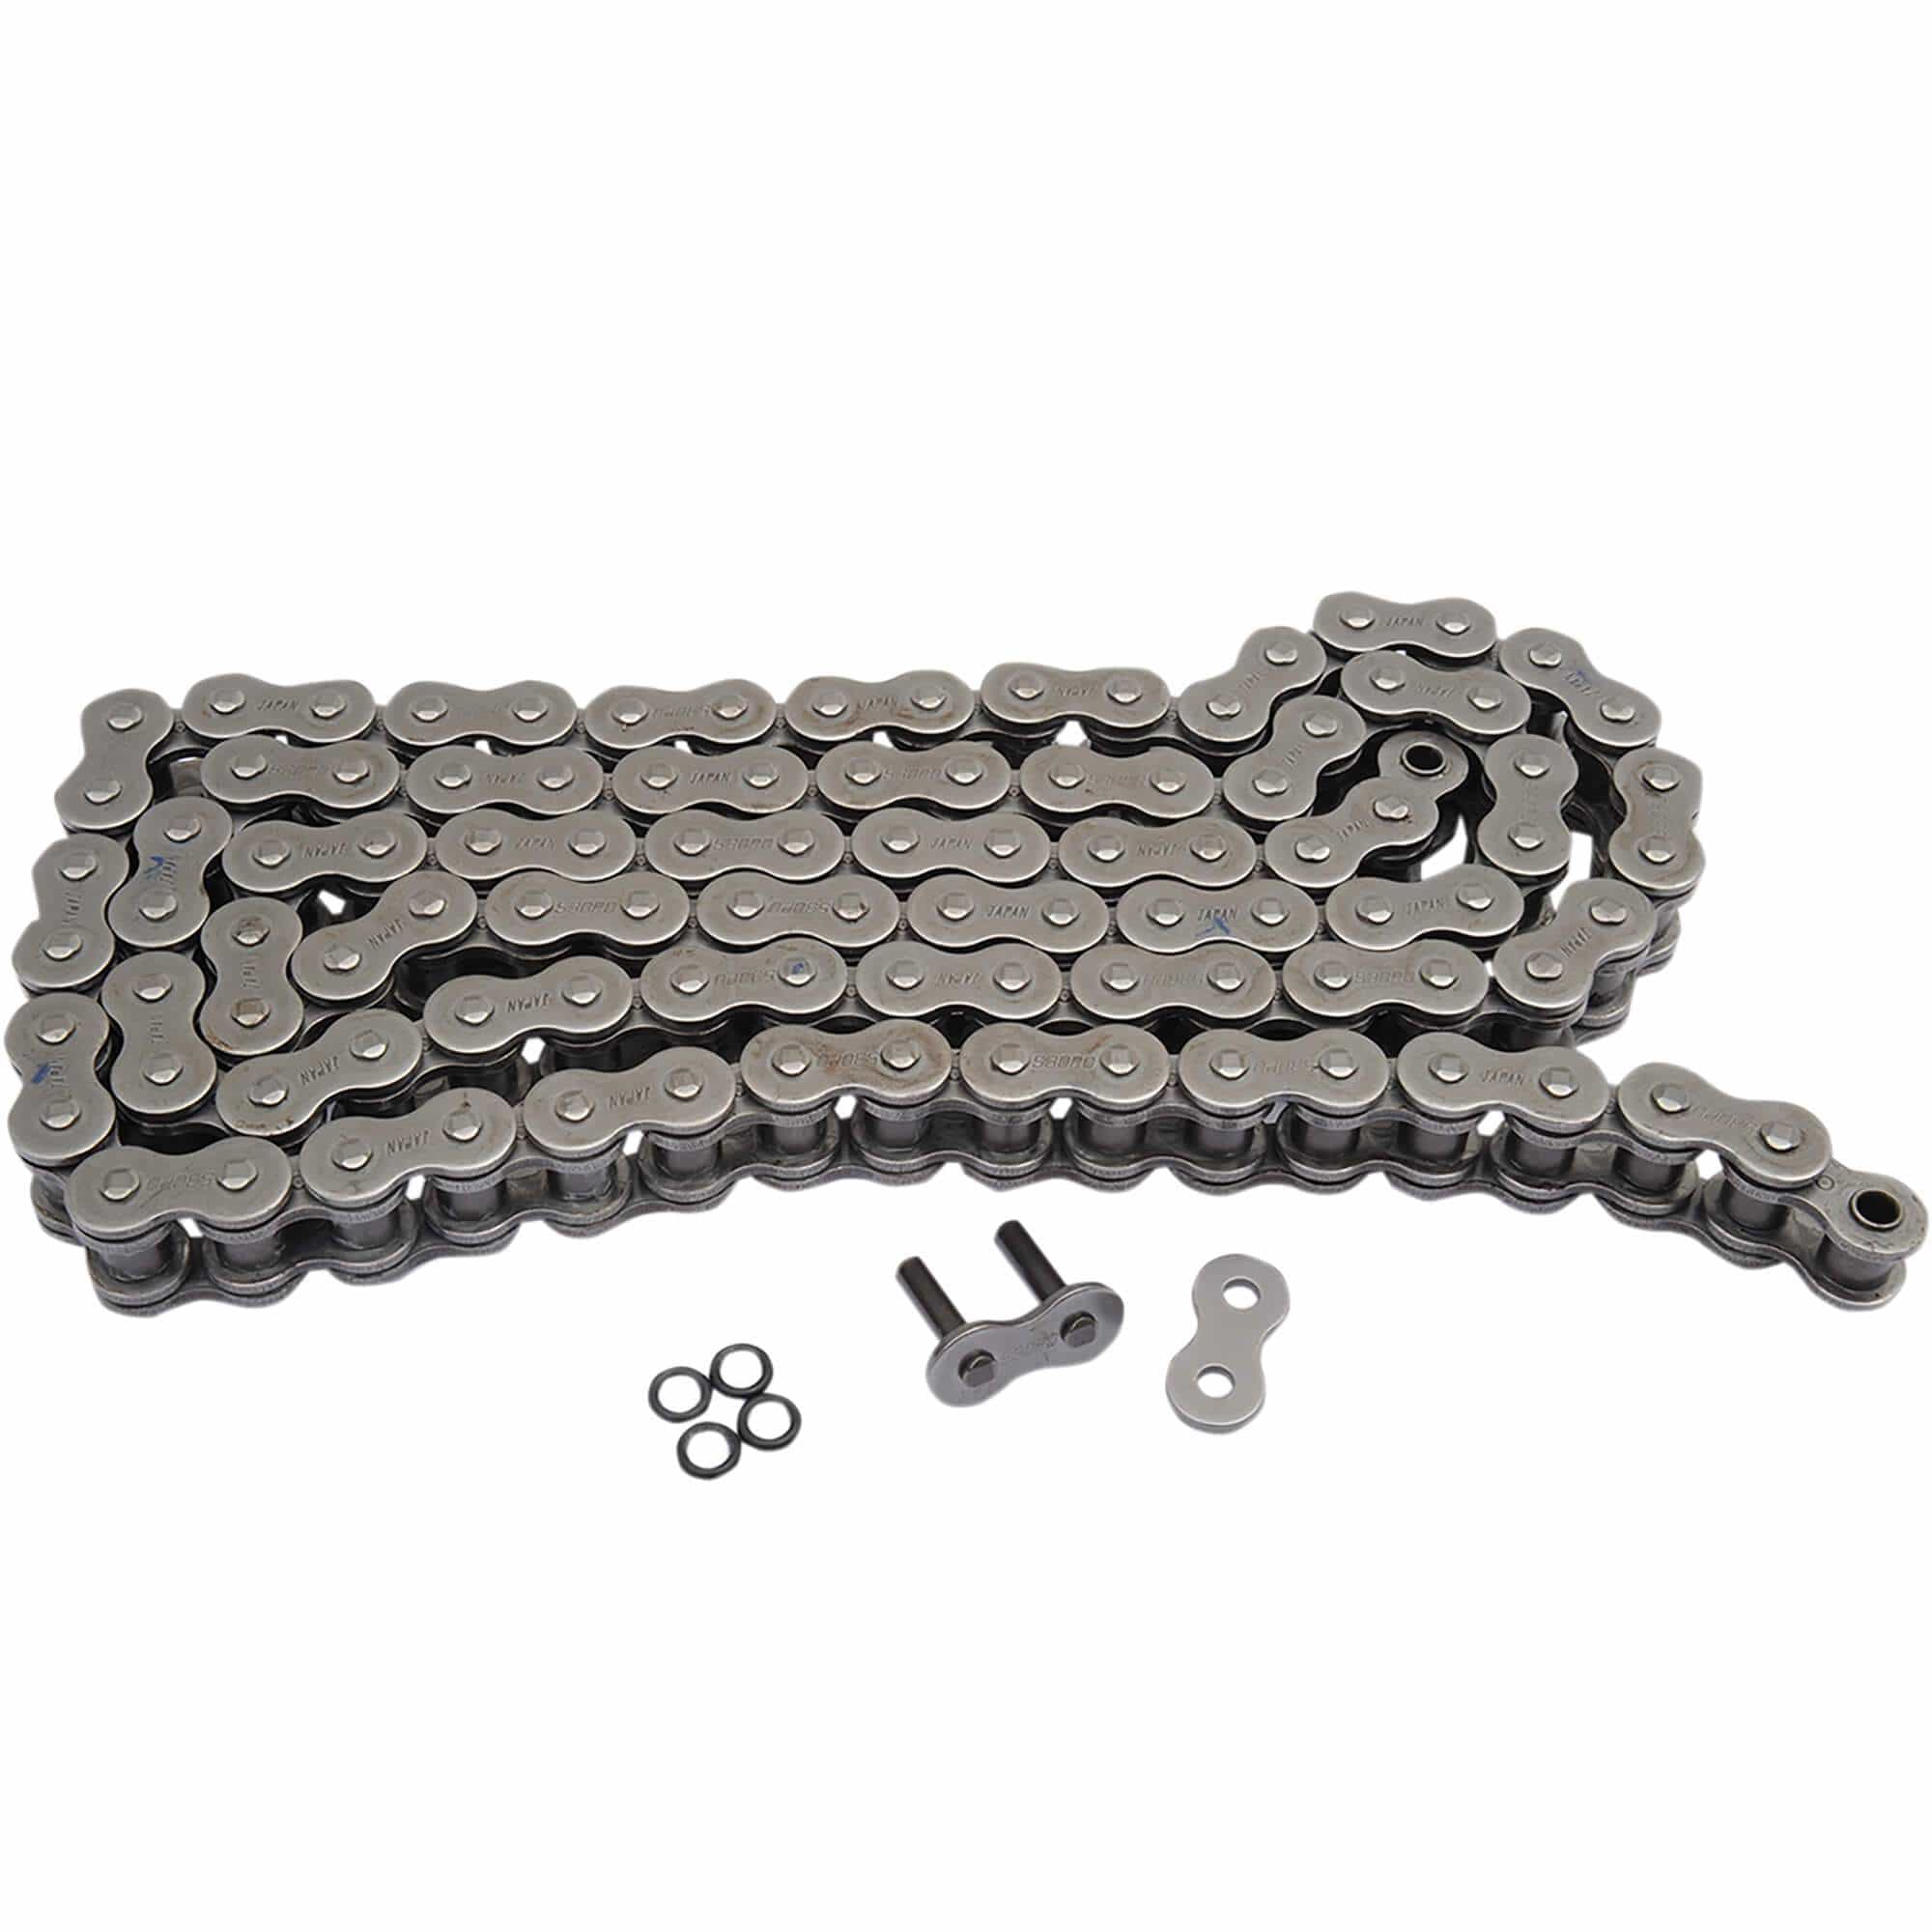 ROLON O RING CHAIN FOR ROYAL ENFIELD CLASSIC 350 AND STANDARD 350 - MOTO  AVENUE